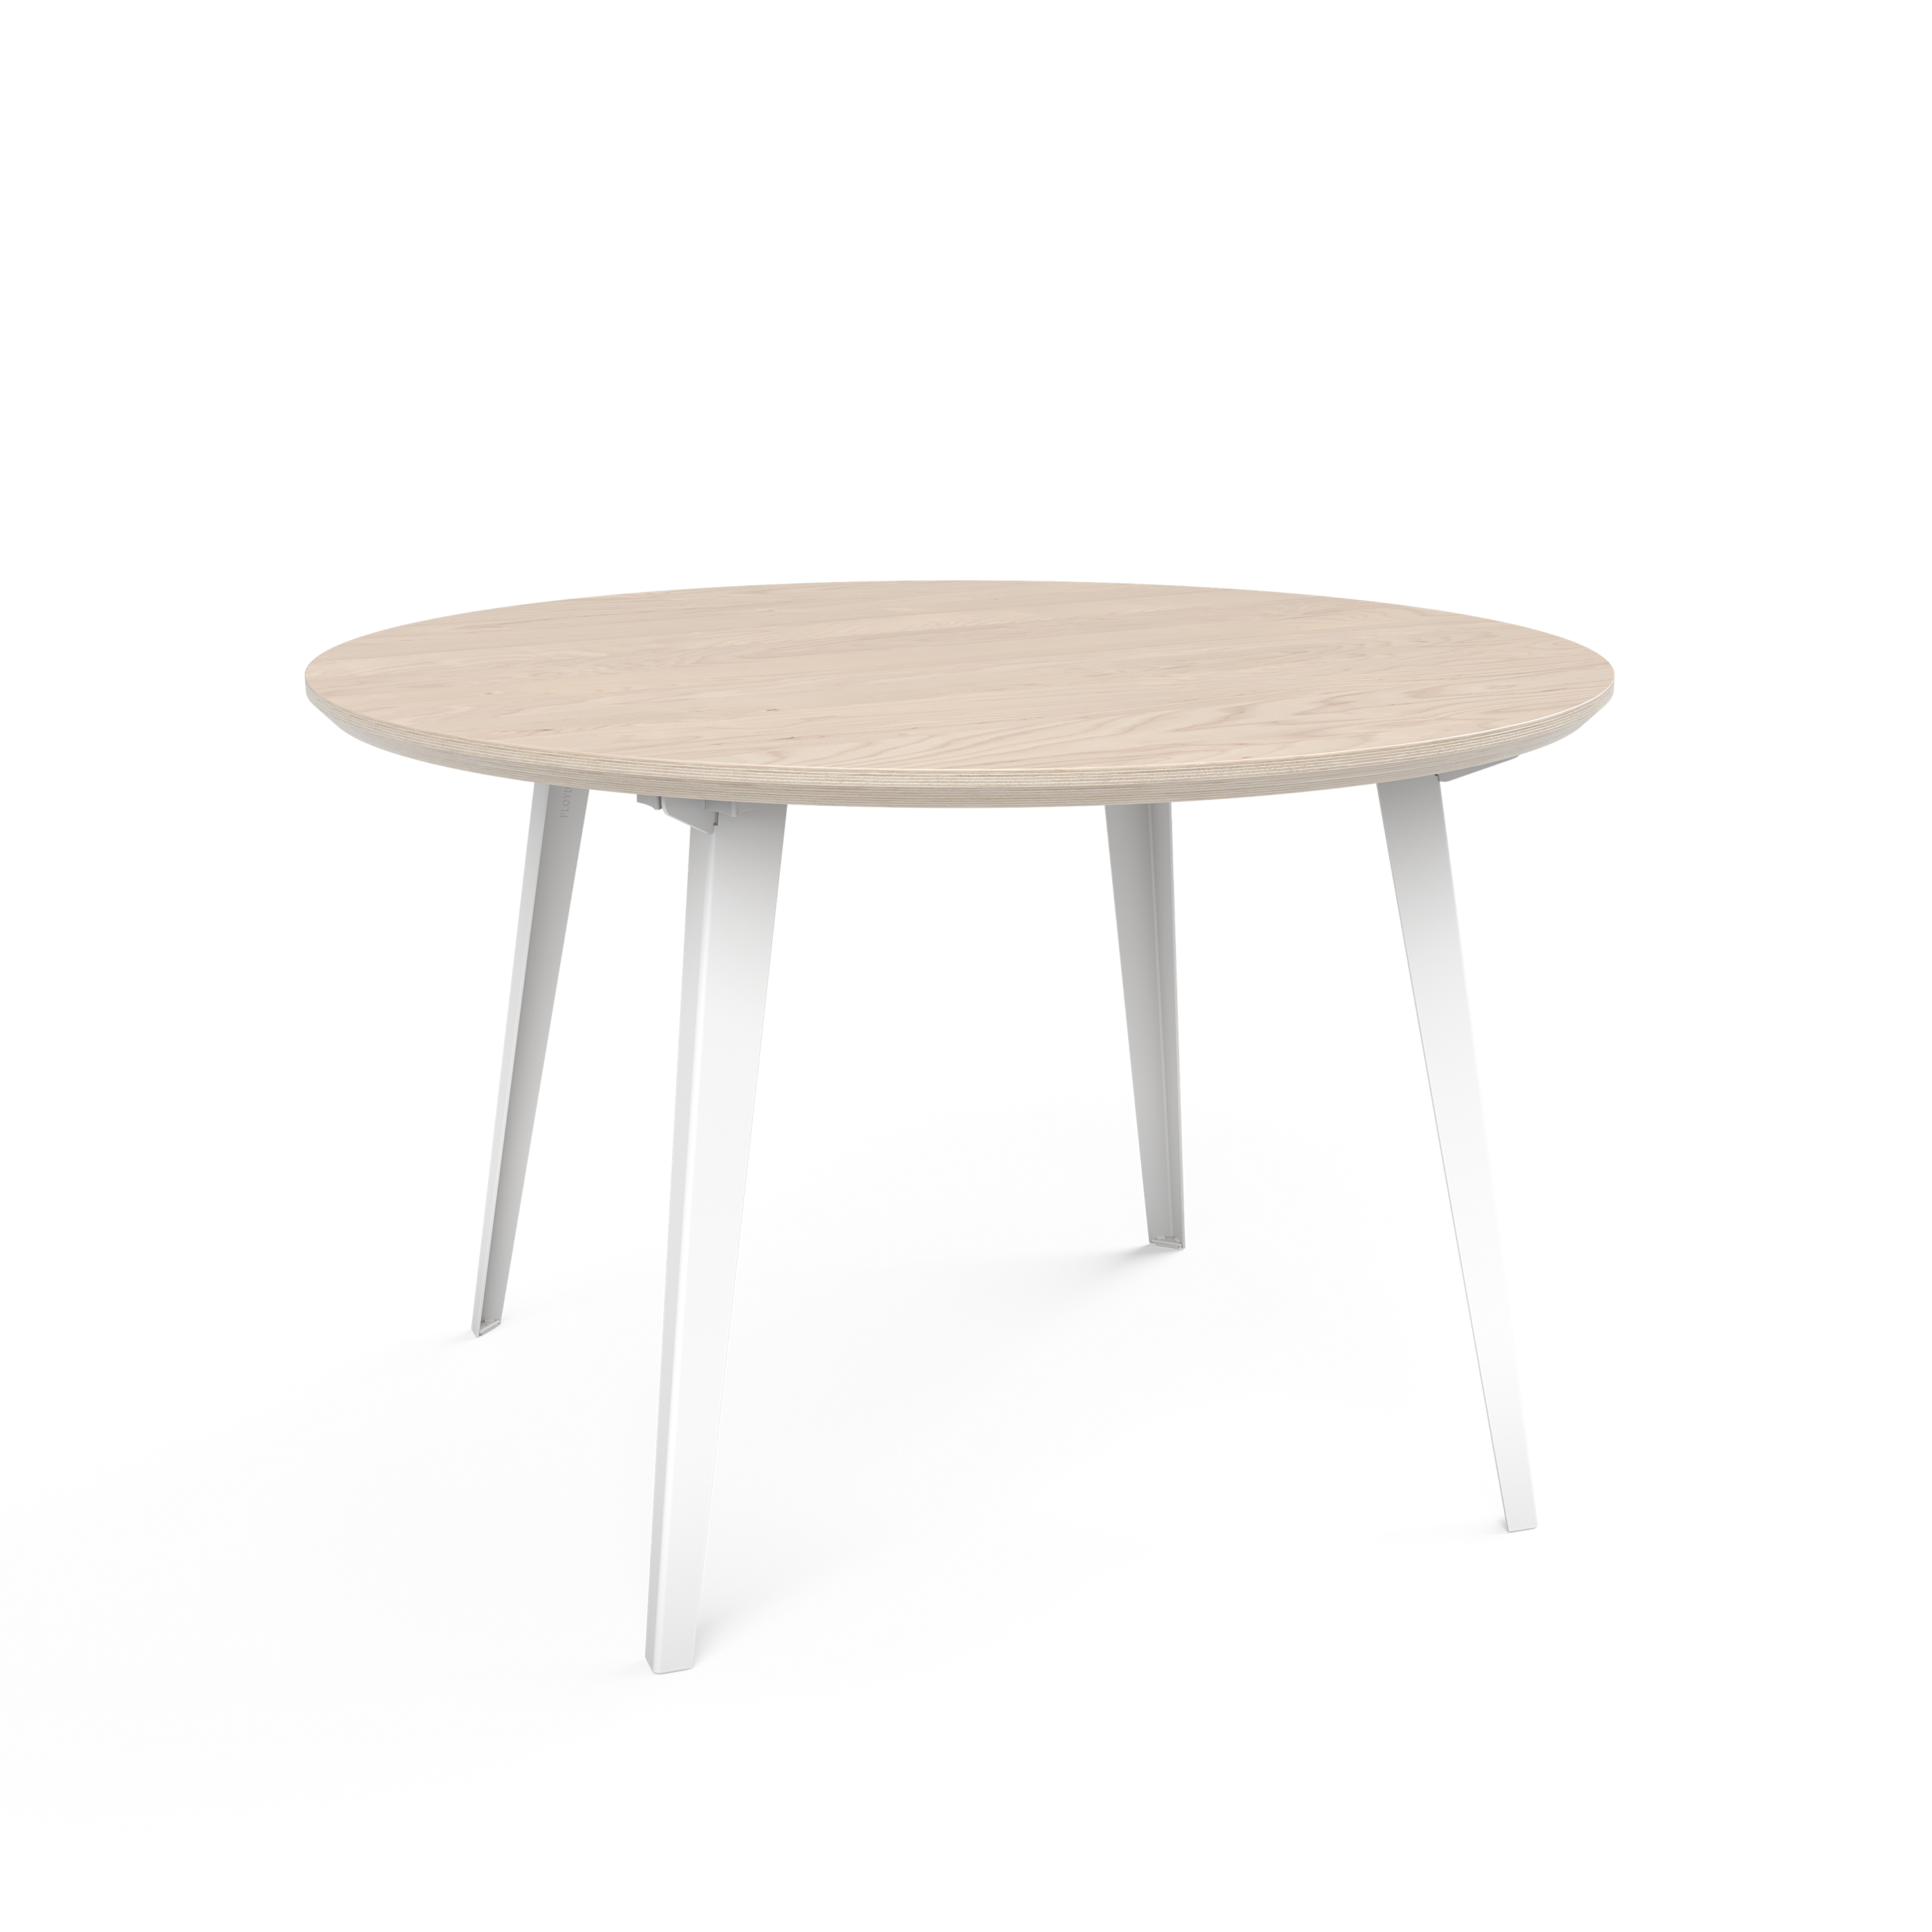 Round Modern Table with light birch wood top and white metal legs